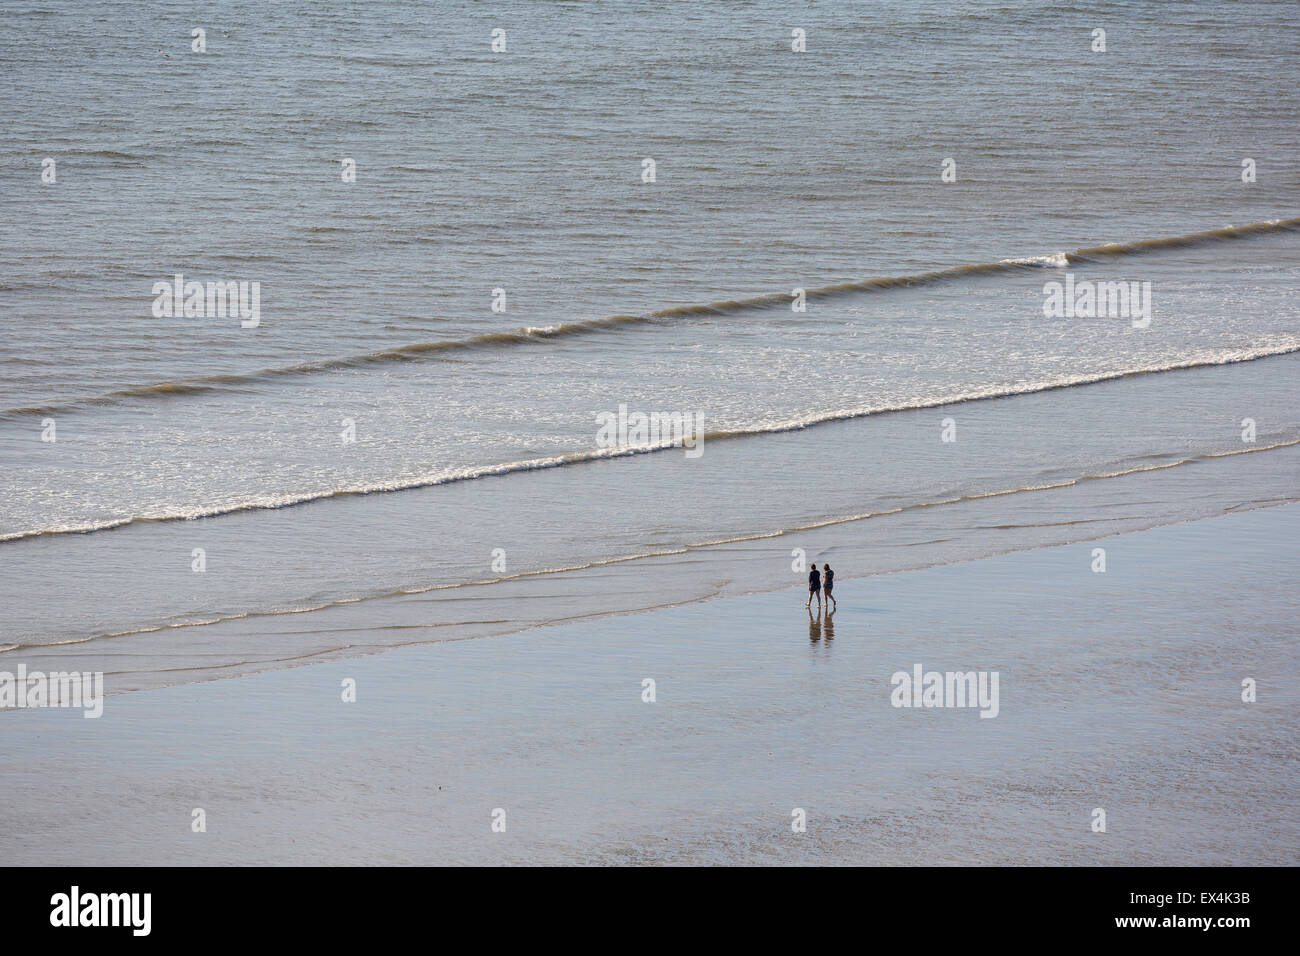 Two people on a deserted beach, Rhossili, Gower, South Wales Stock Photo